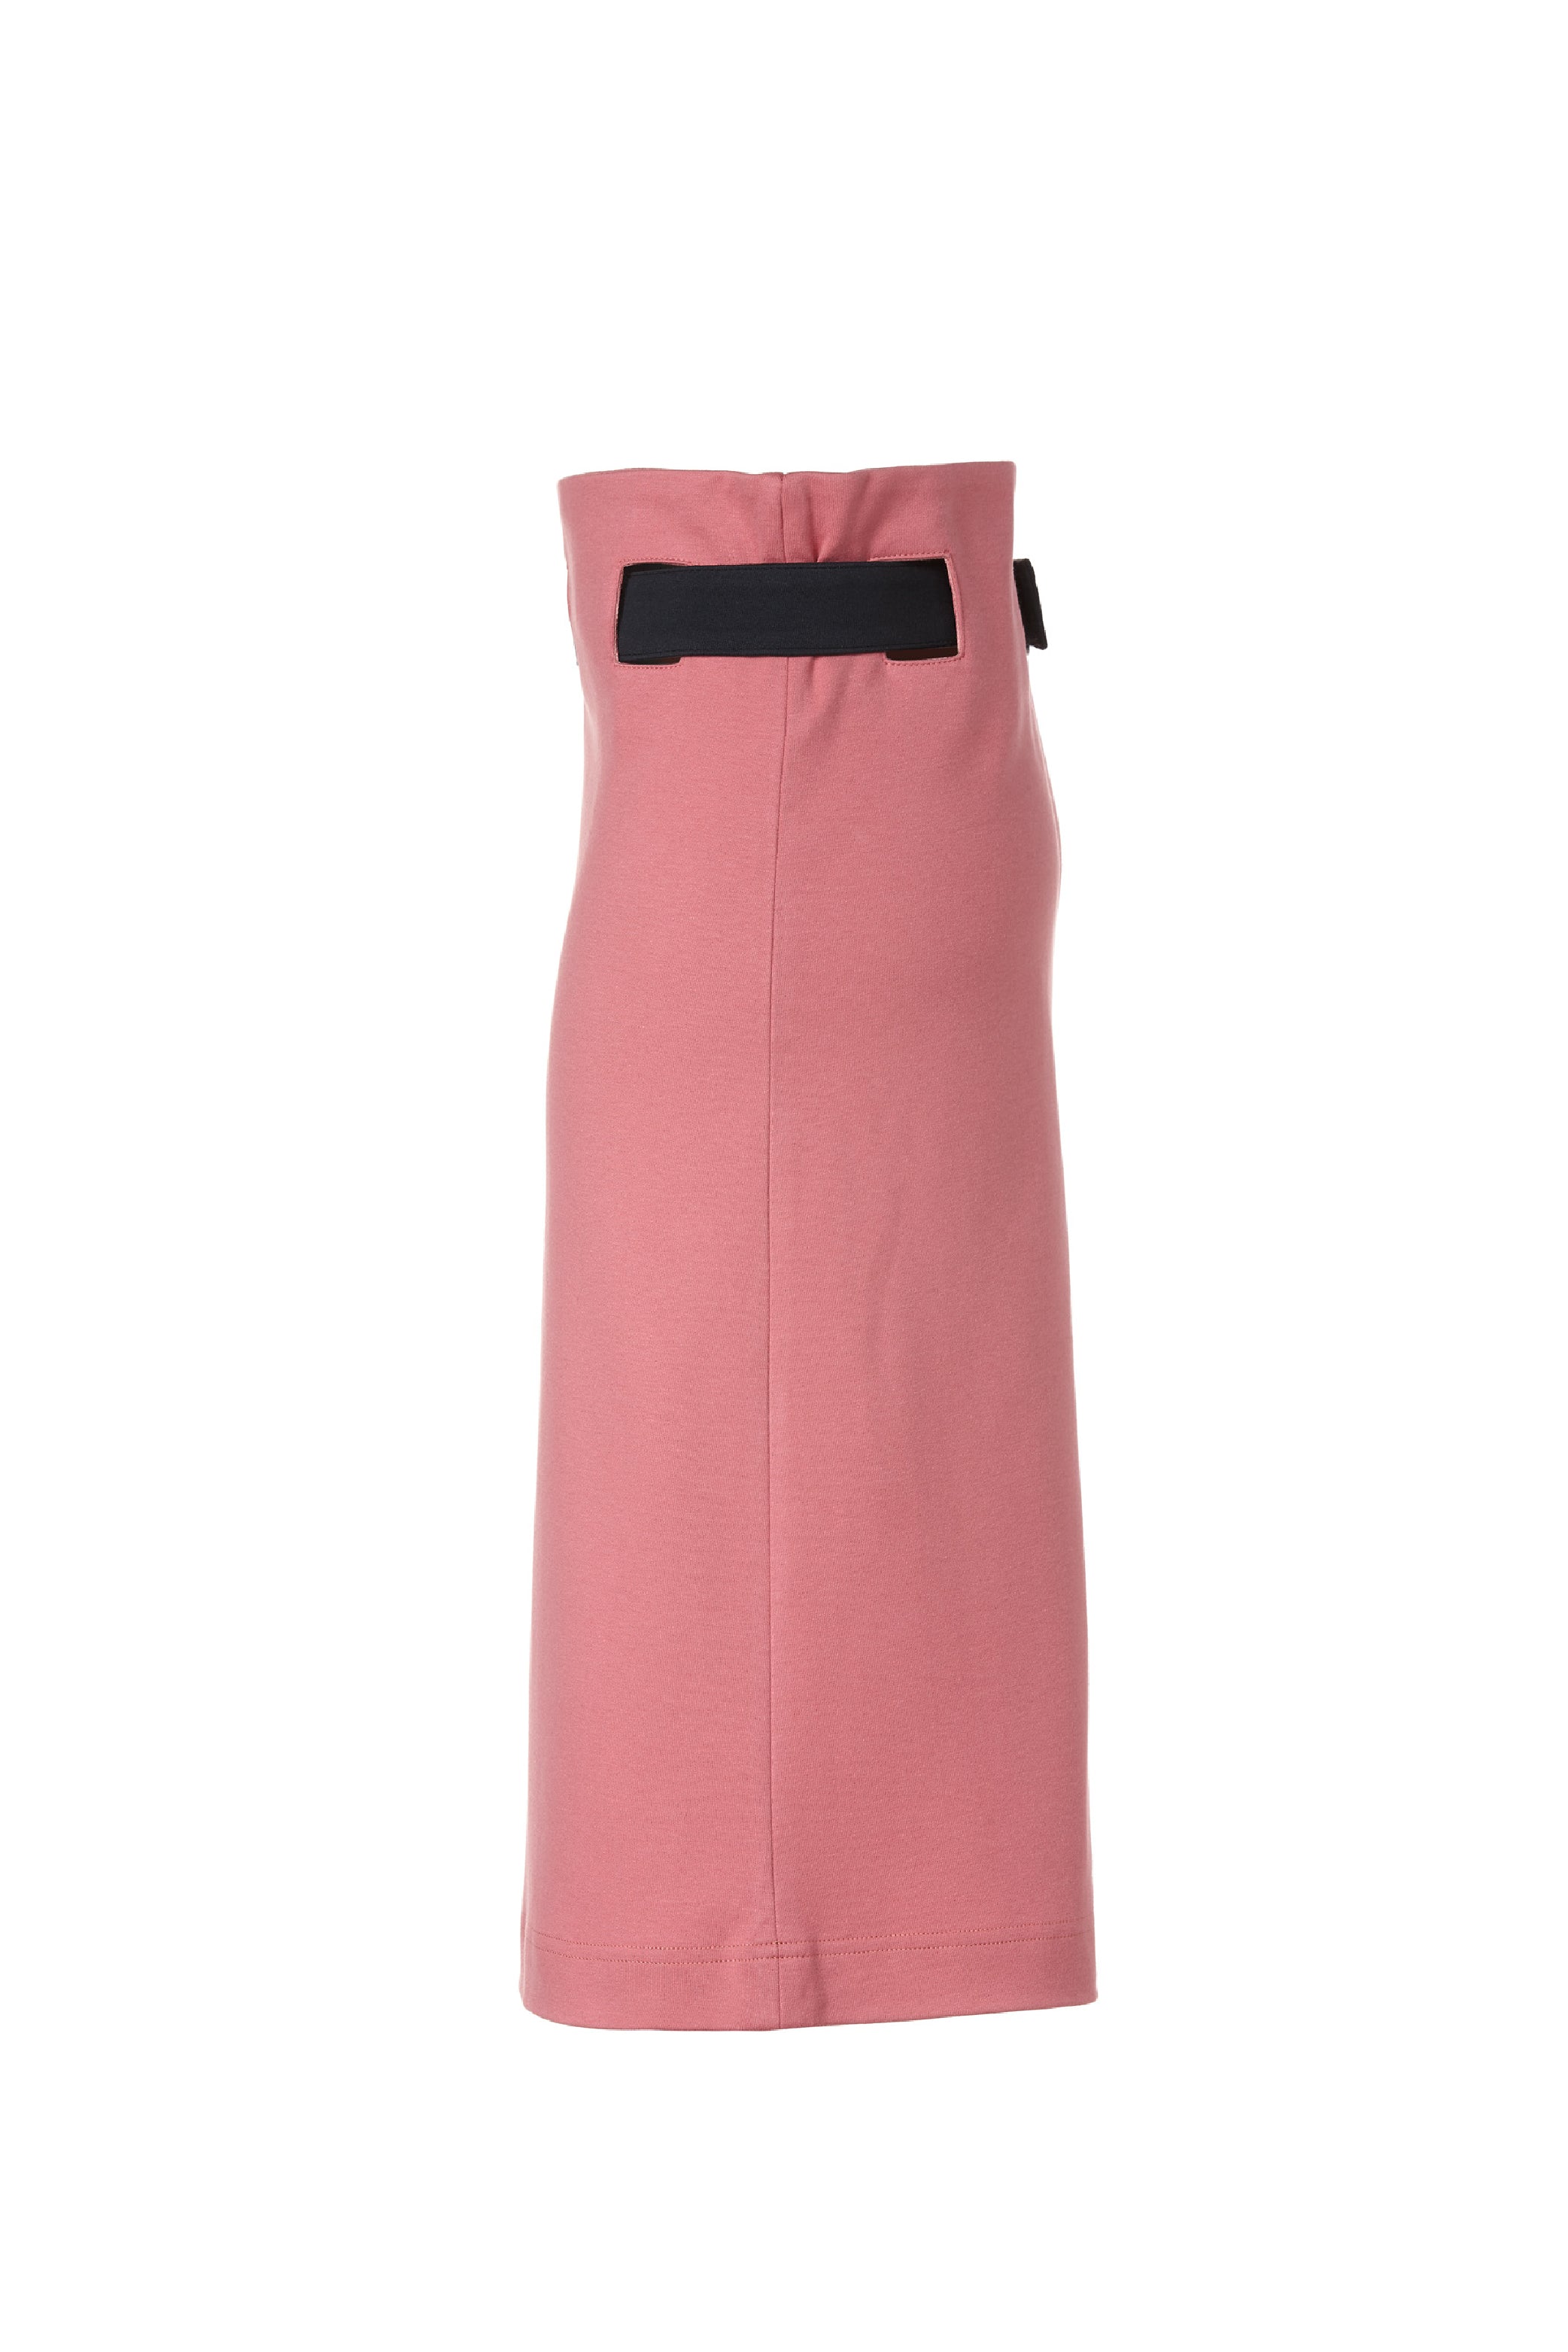 ALICE belted skirt, dusty pink